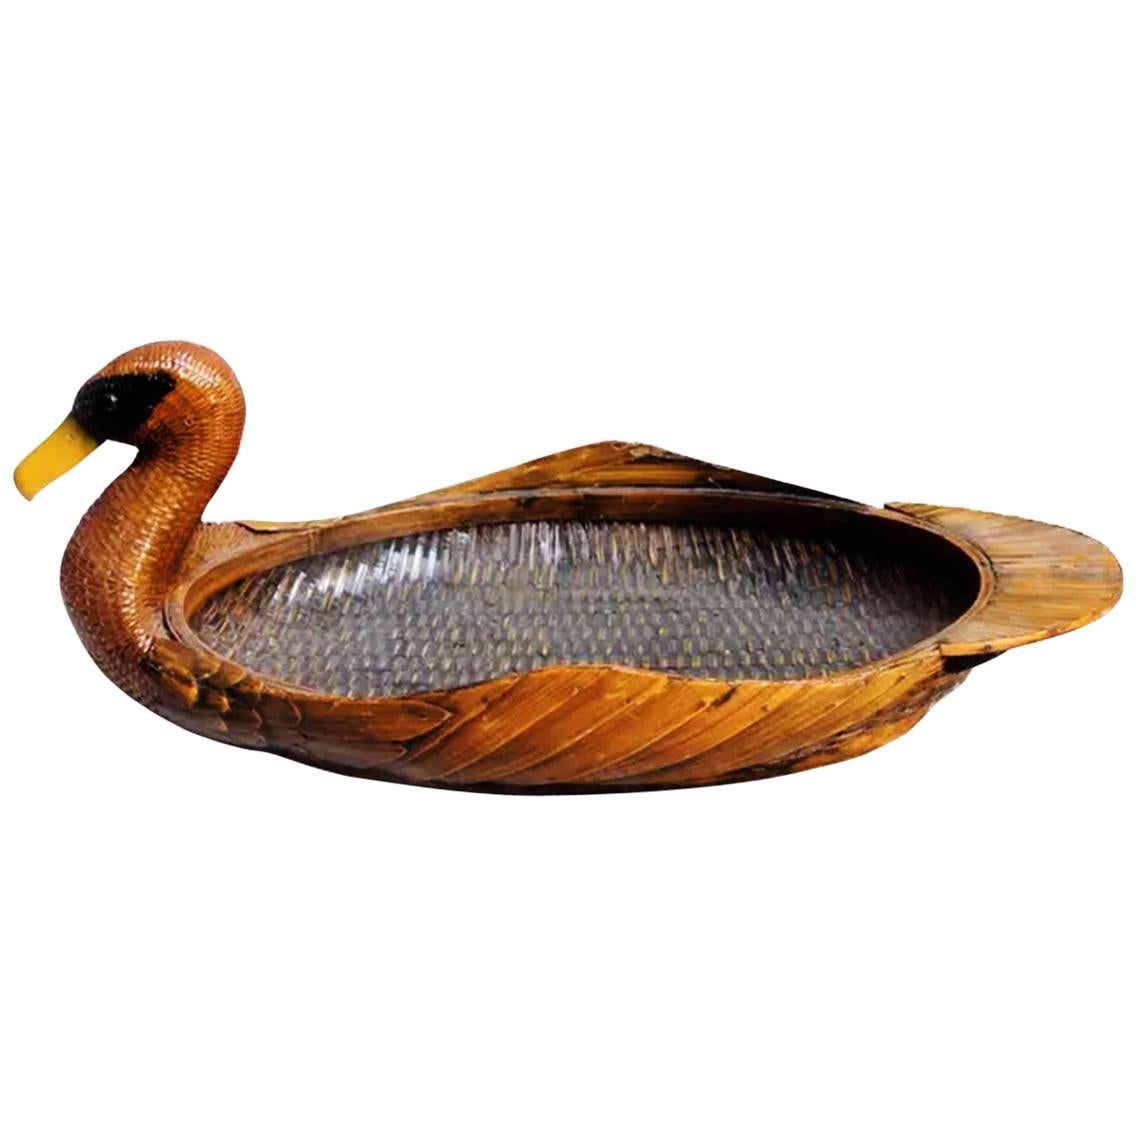 Midcentury Wooden Tray and Rattan, Duck-Shaped